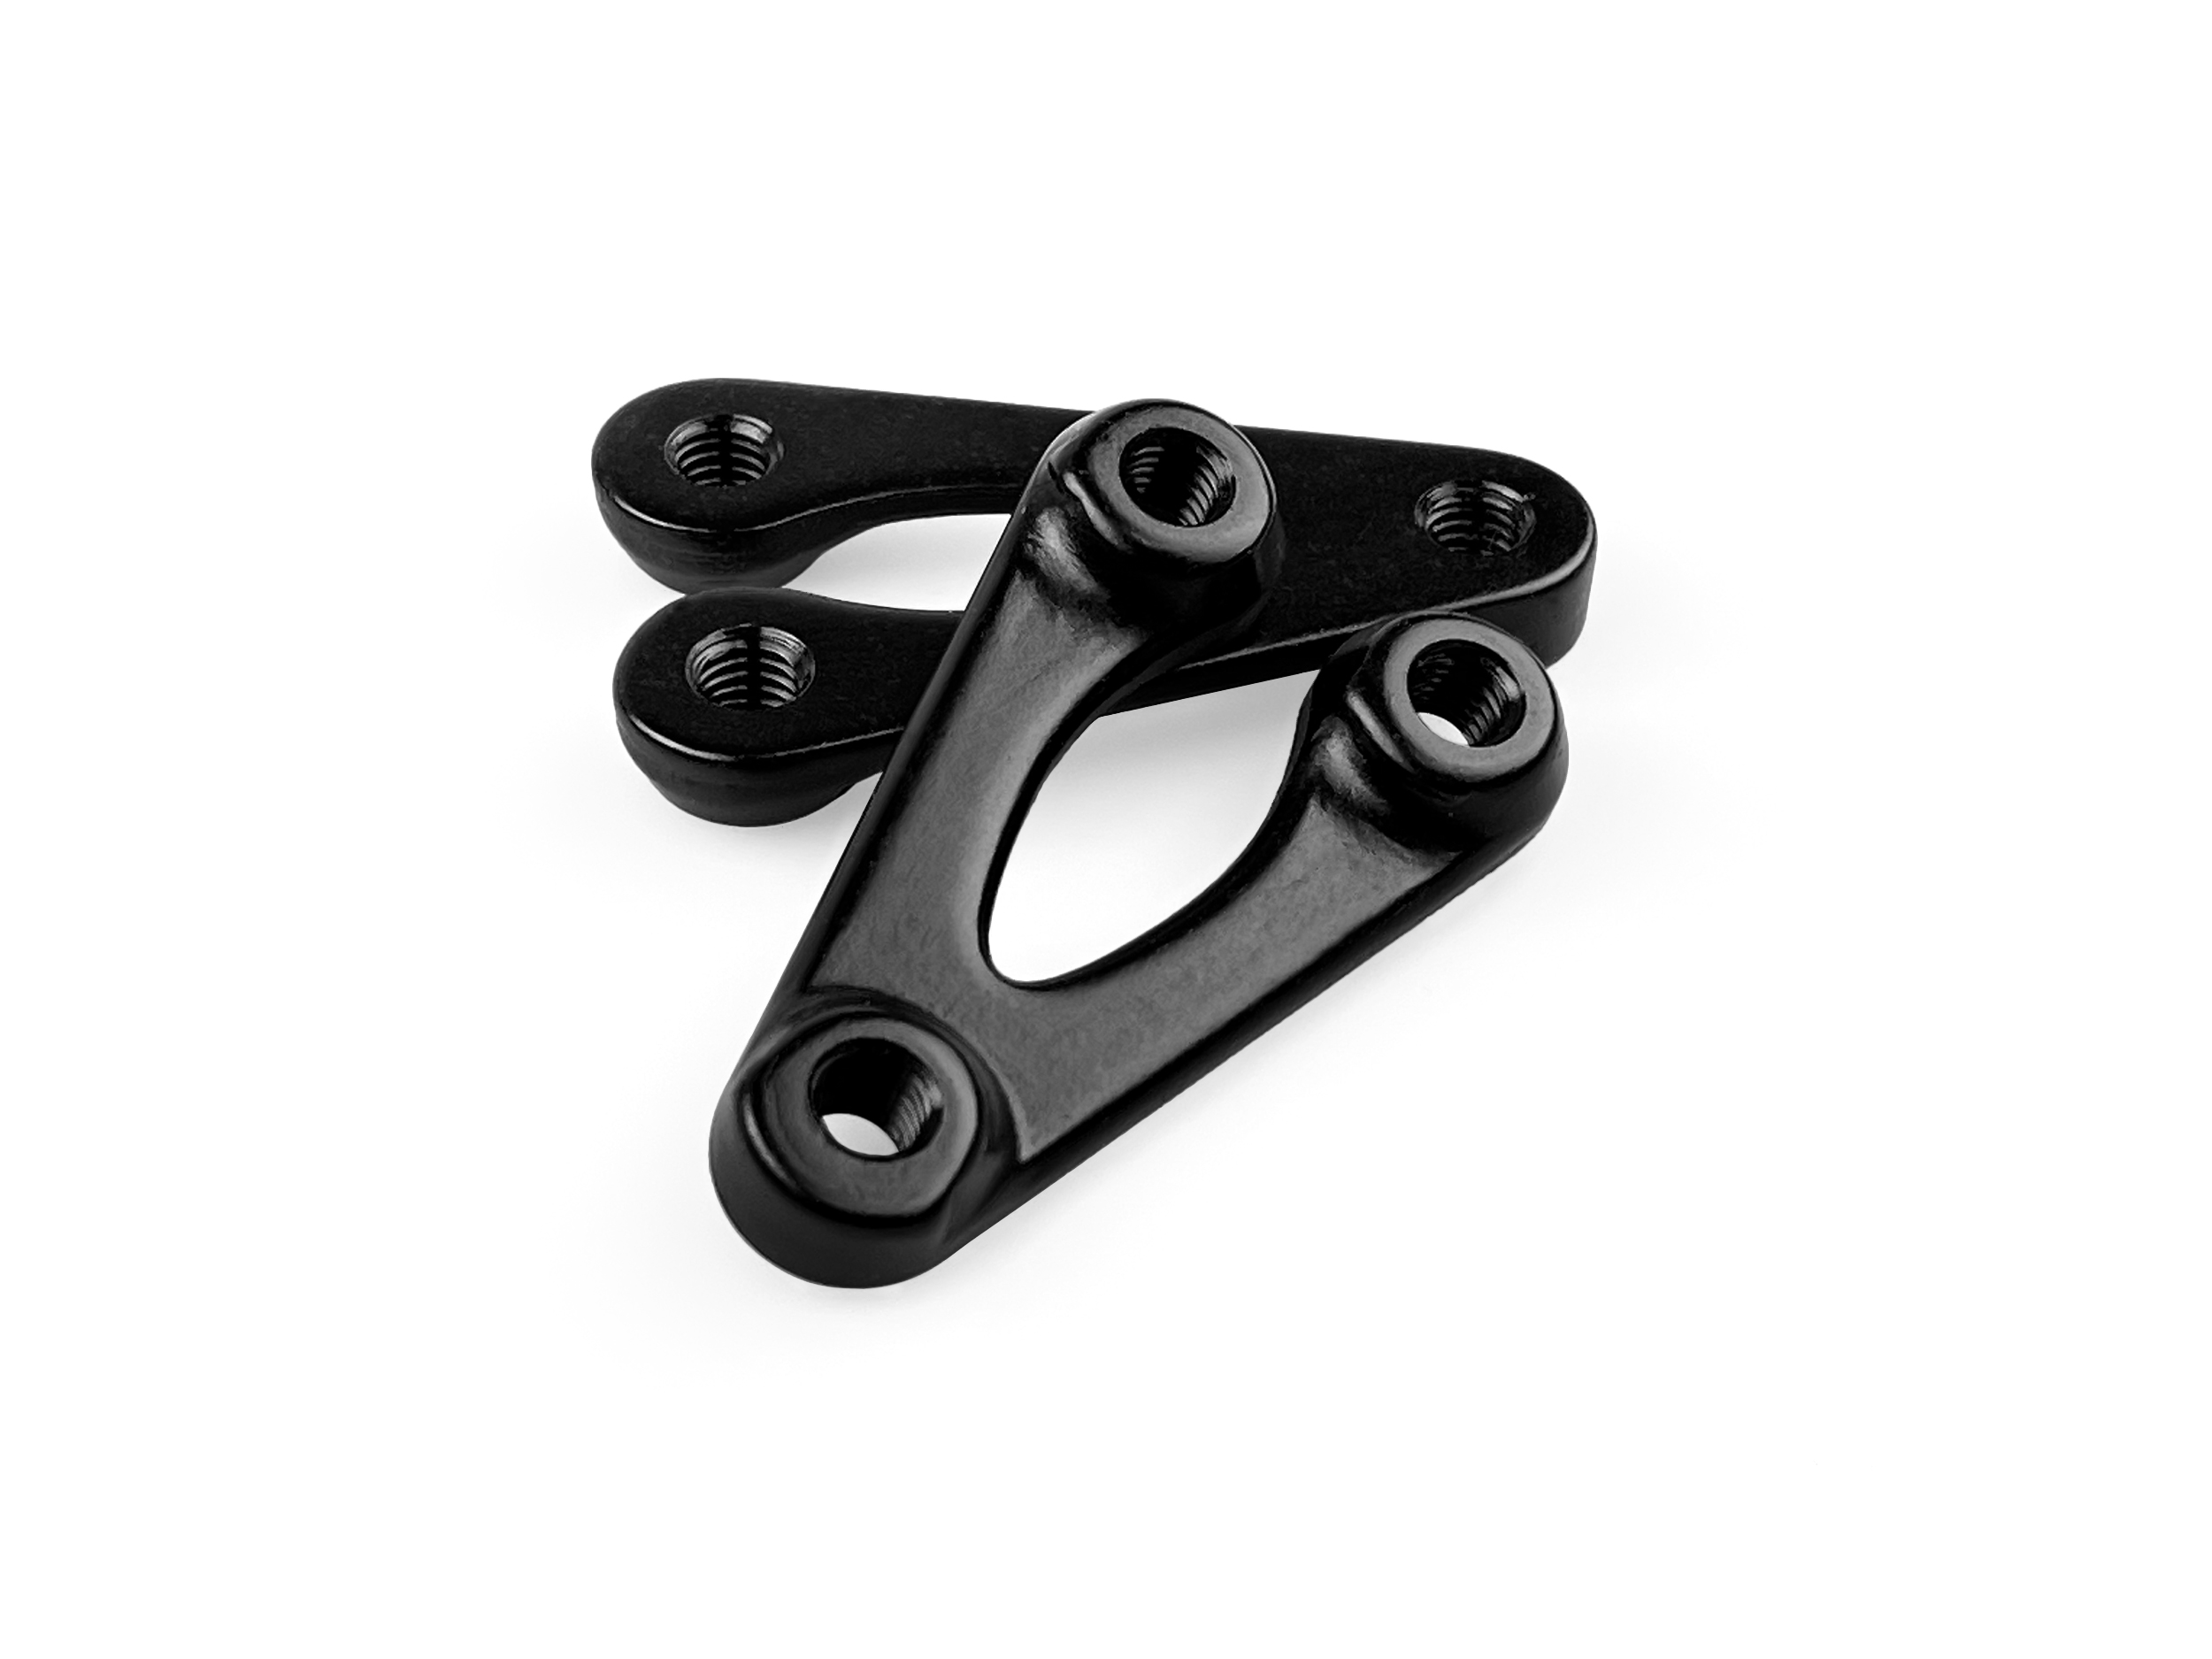 DART-A19997_Shock mounts with bolts for 185x50mm shock (Trail version) for Rocbird frame